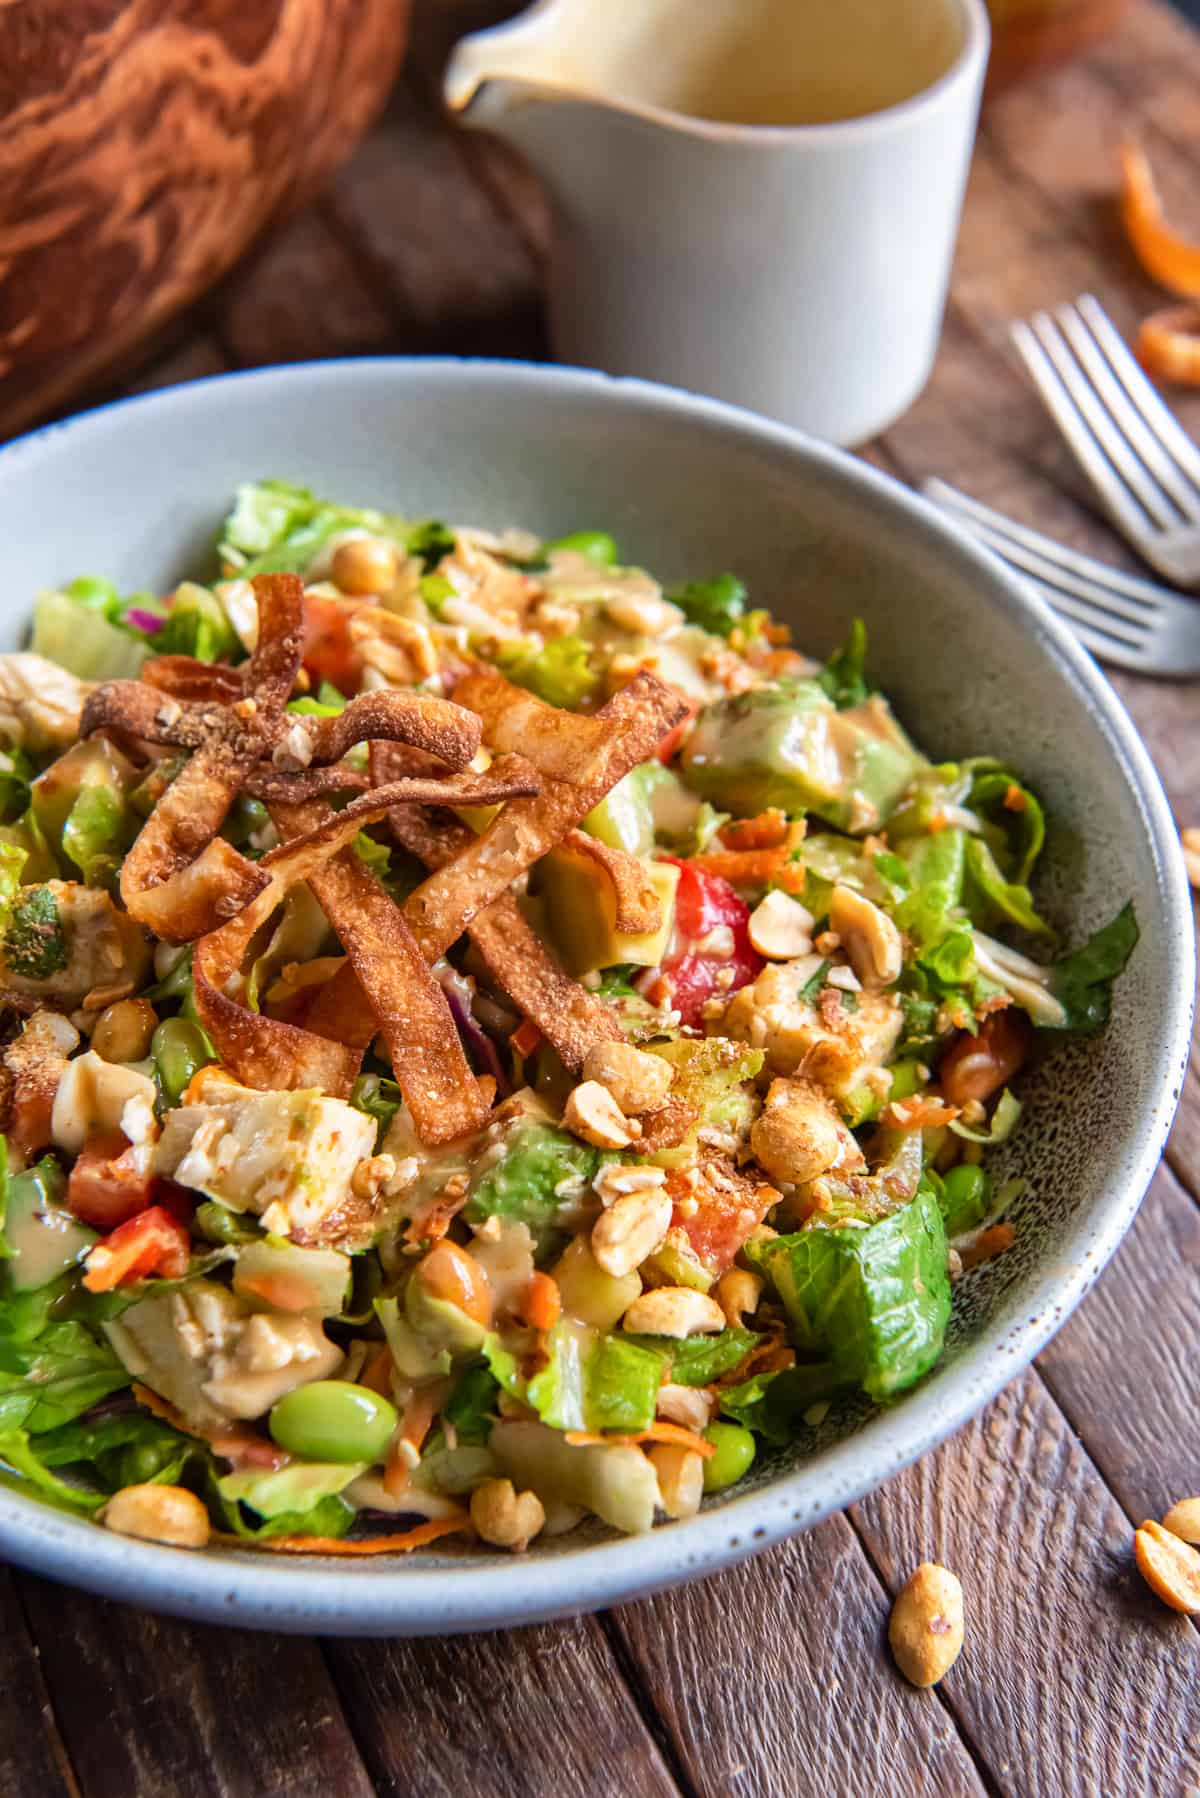 A close up of a thai salad with chicken, edamame, peanut dressing and wonton strips.